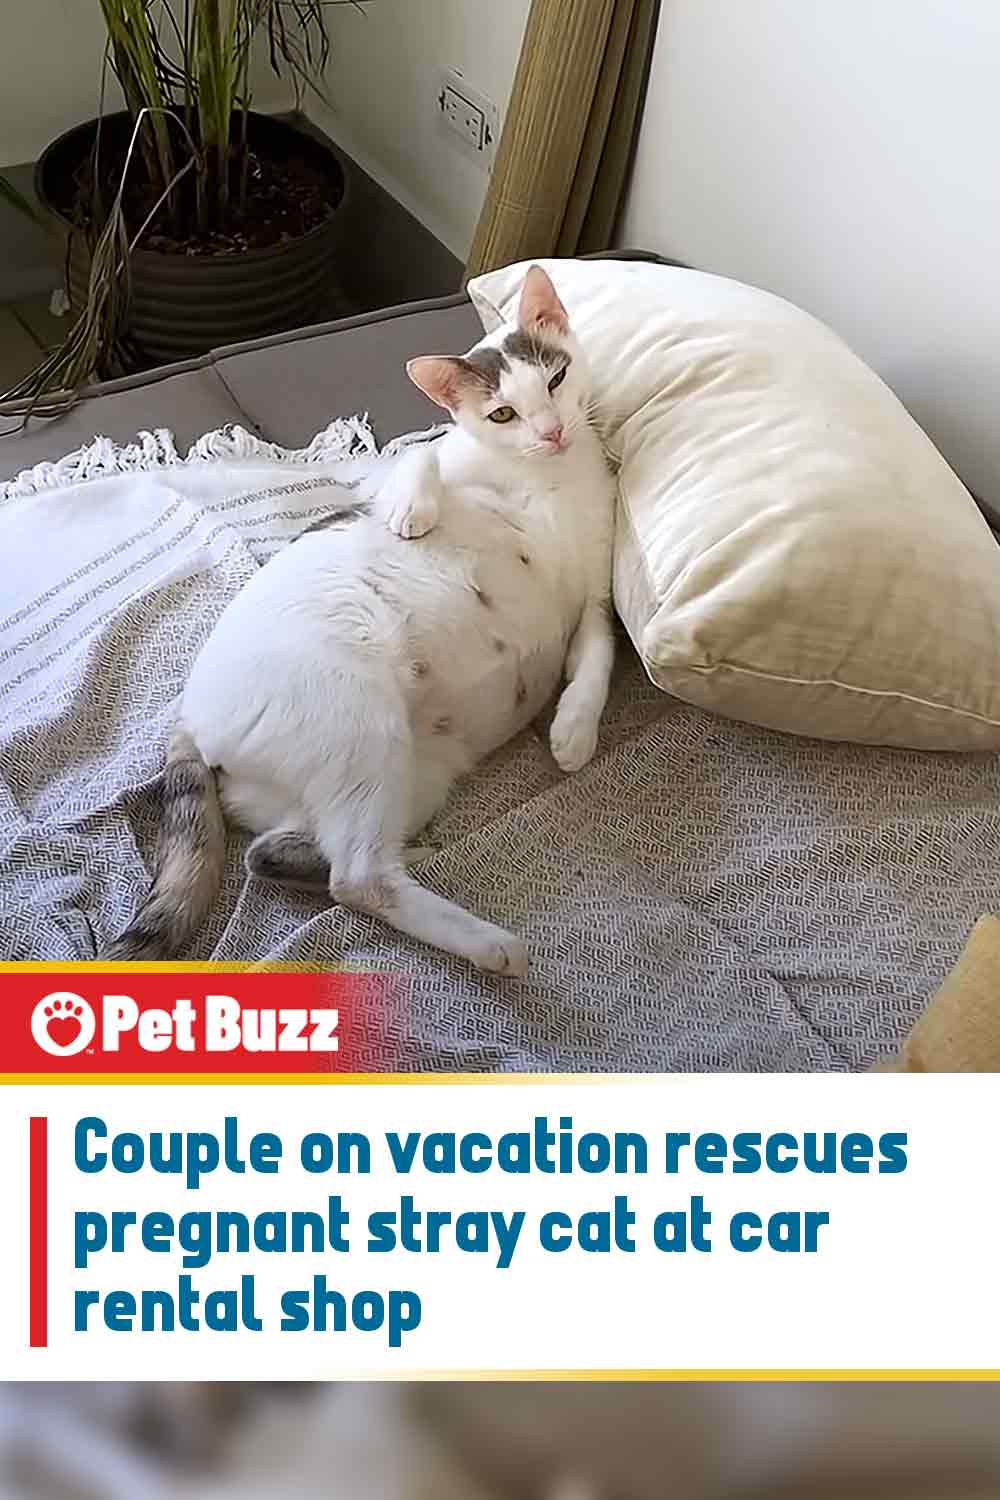 Couple on vacation rescues pregnant stray cat at car rental shop